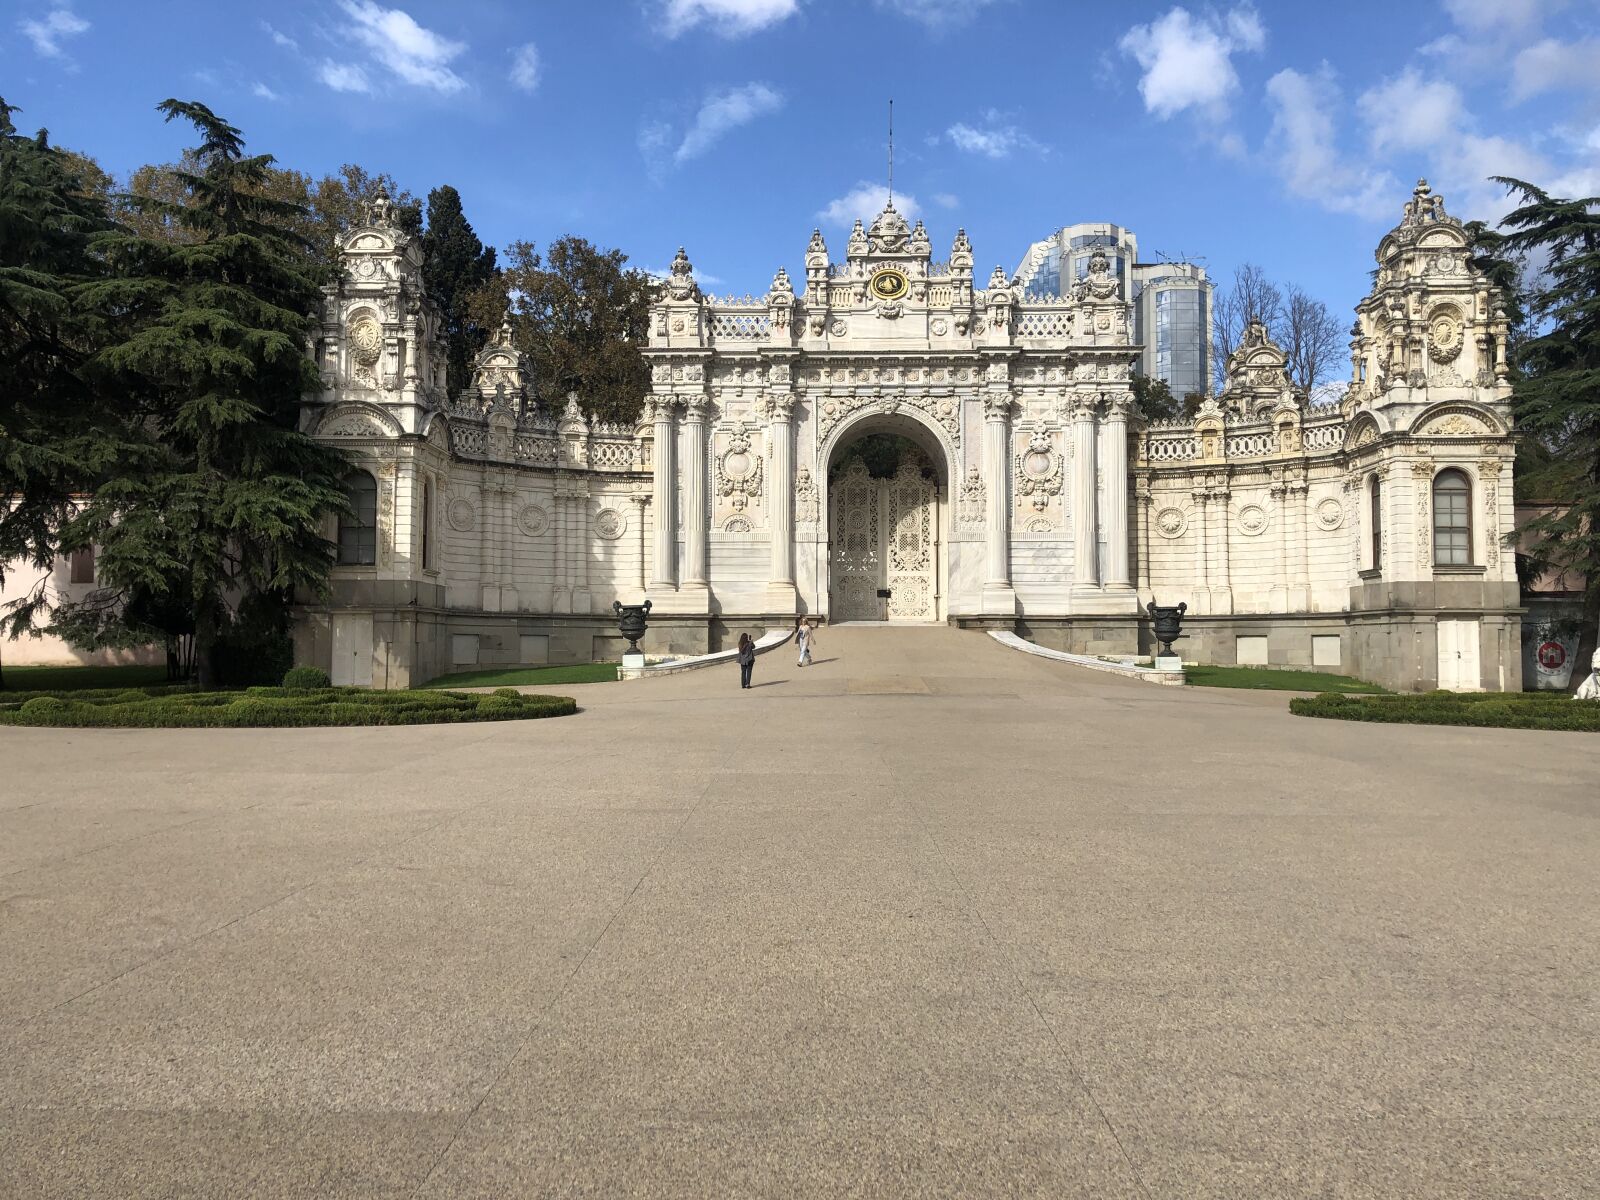 Apple iPhone 8 Plus + iPhone 8 Plus back dual camera 3.99mm f/1.8 sample photo. Dolmabahçe palace İstanbul photography